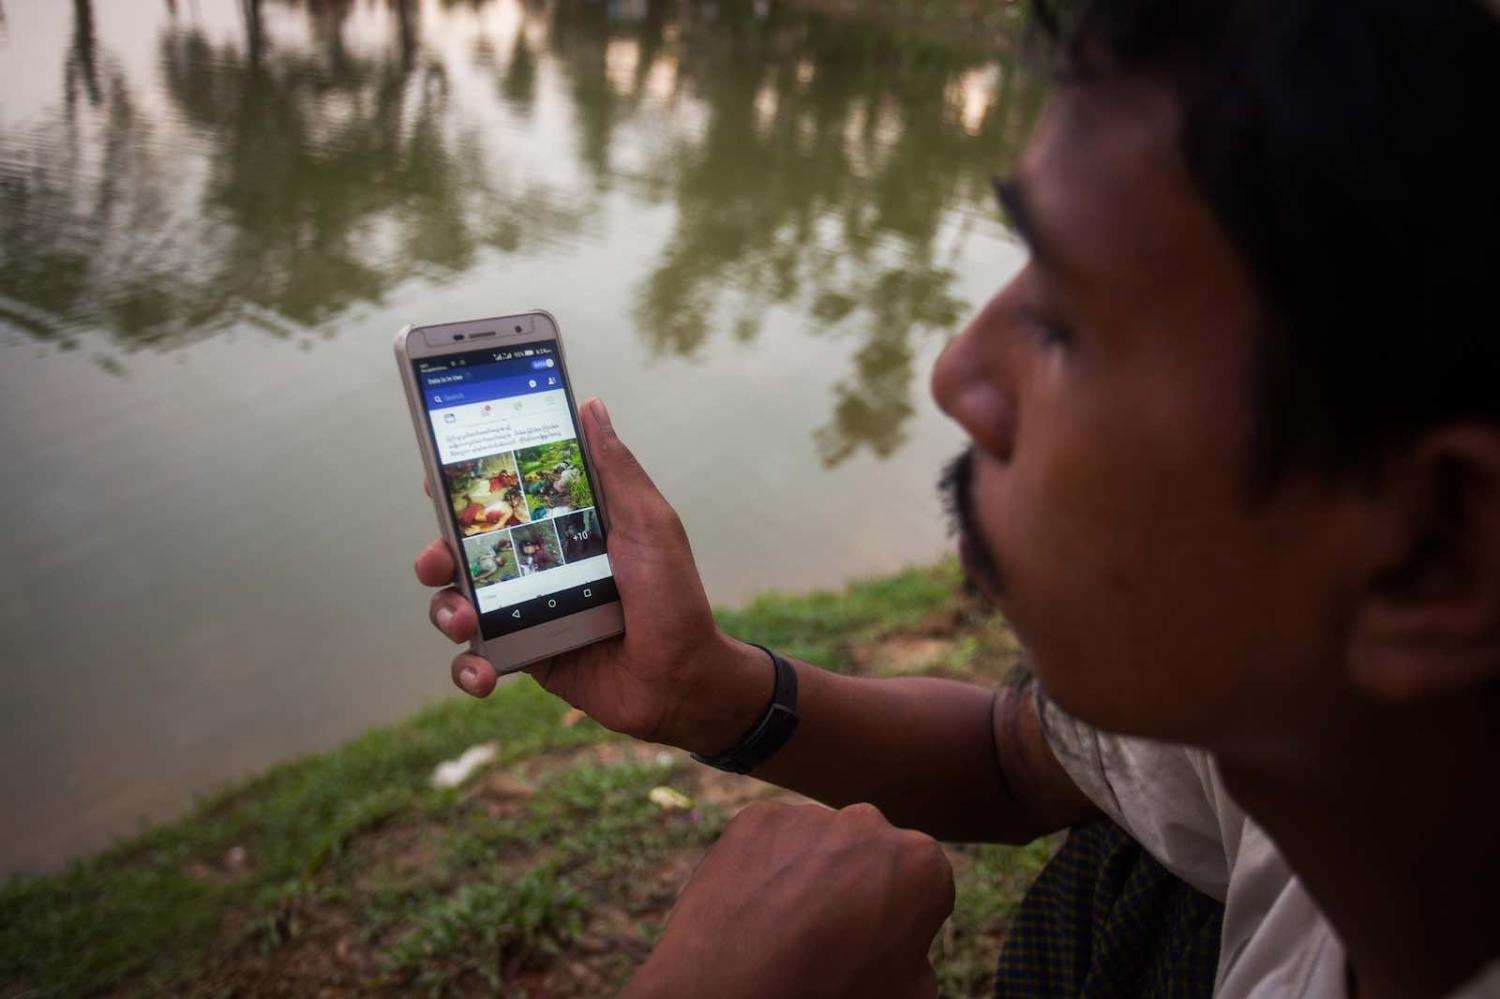 Restrictions were put in place to undermine purported Rohingya “criminal activities” but mobile technologies are a key tool for camp residents to protect themselves, too (Photo: Ahmed Salahuddin via Getty Images)